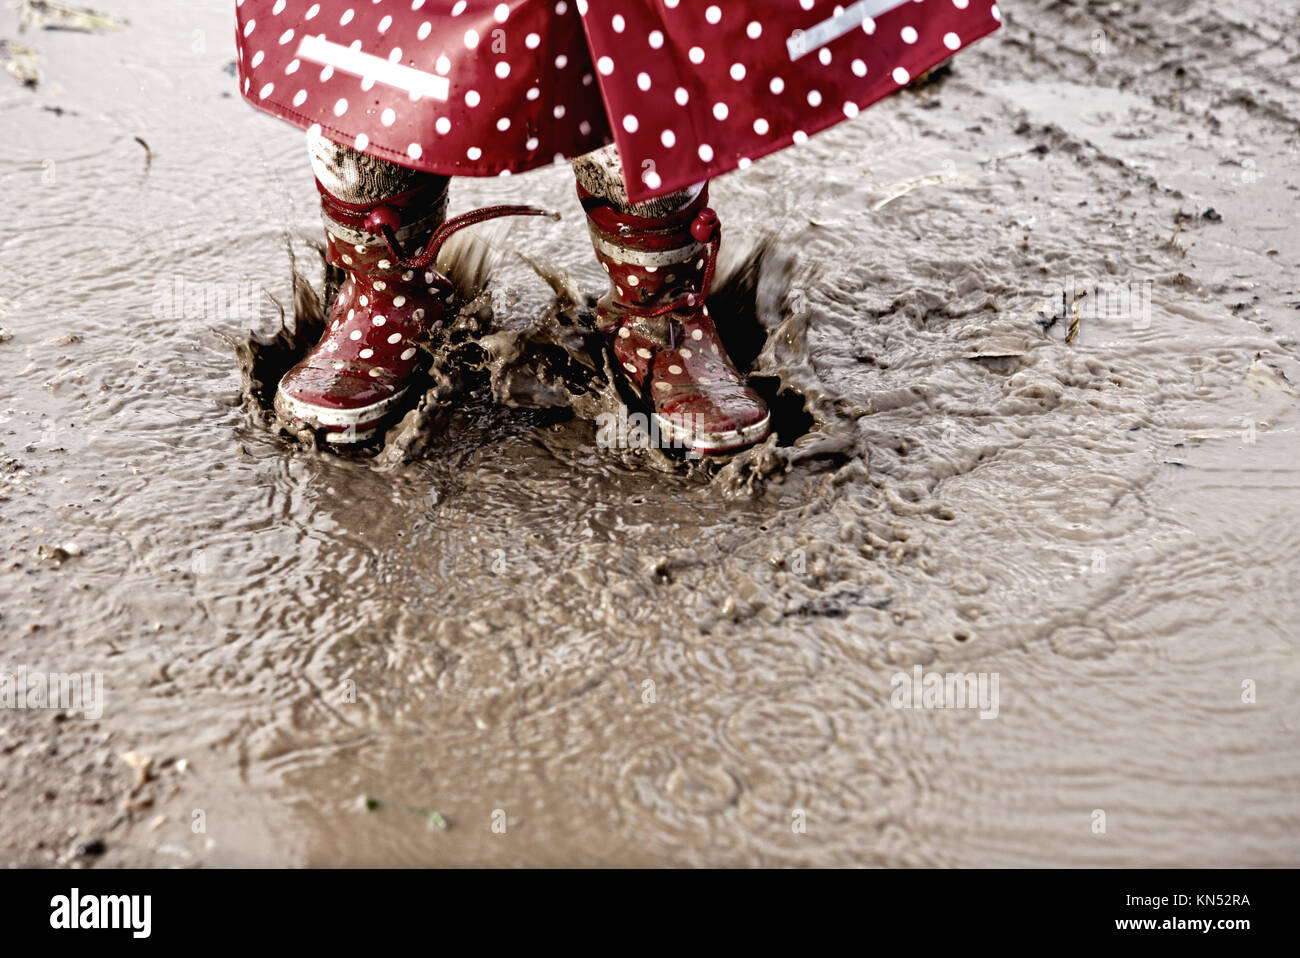 Detail of rainboots of a baby girl dressed with dotted raincoat in the puddles. Stock Photo